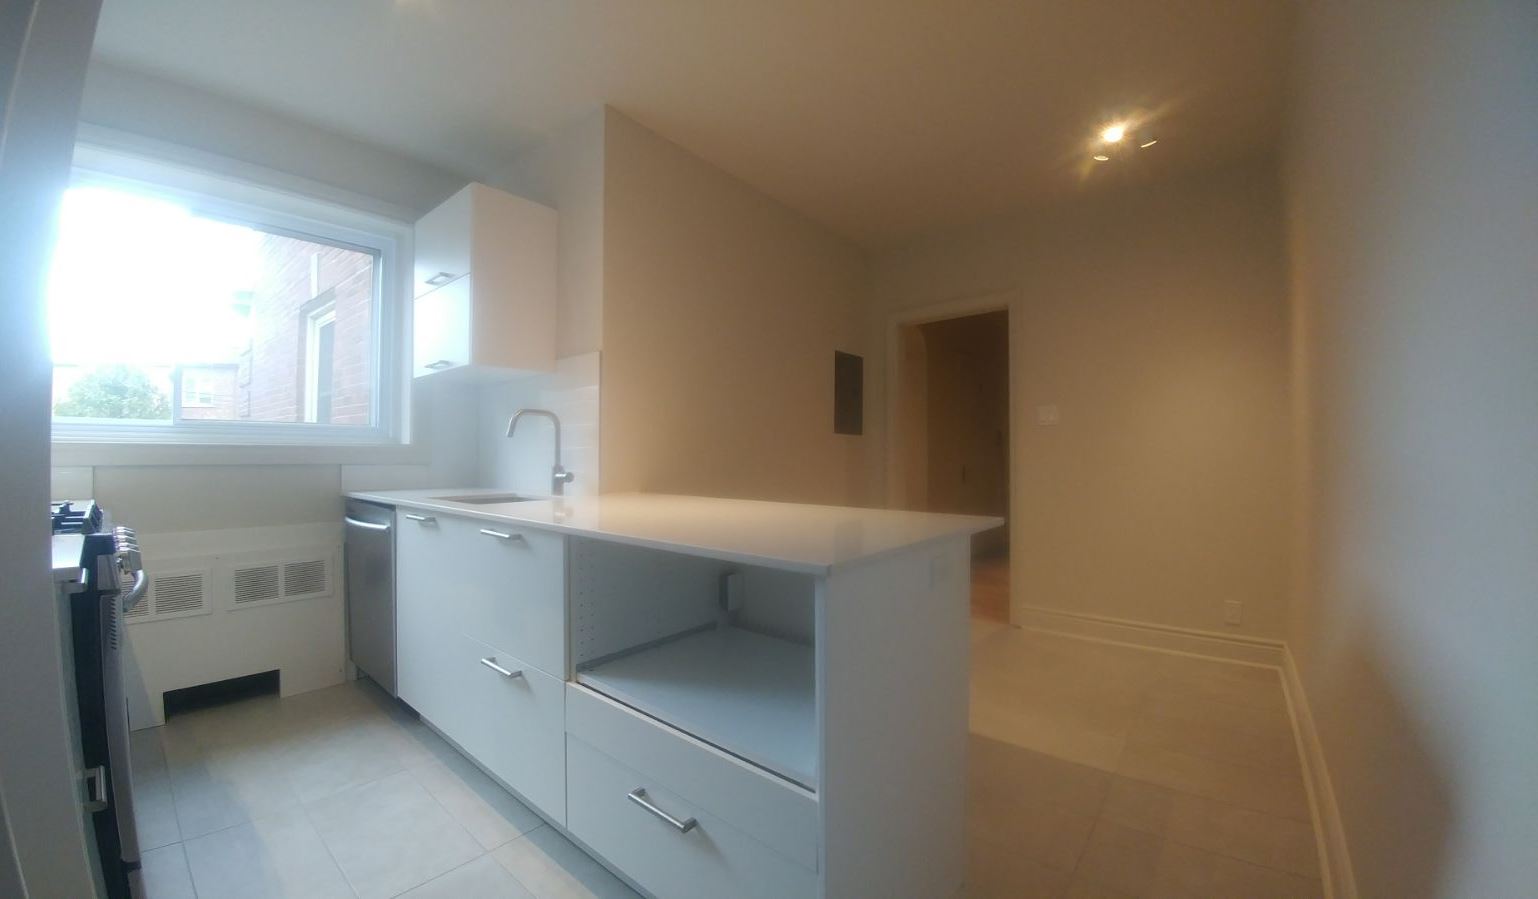 2 bedroom Apartments for rent in Hampstead at 1-2 Ellerdale - Photo 12 - RentersPages – L9523